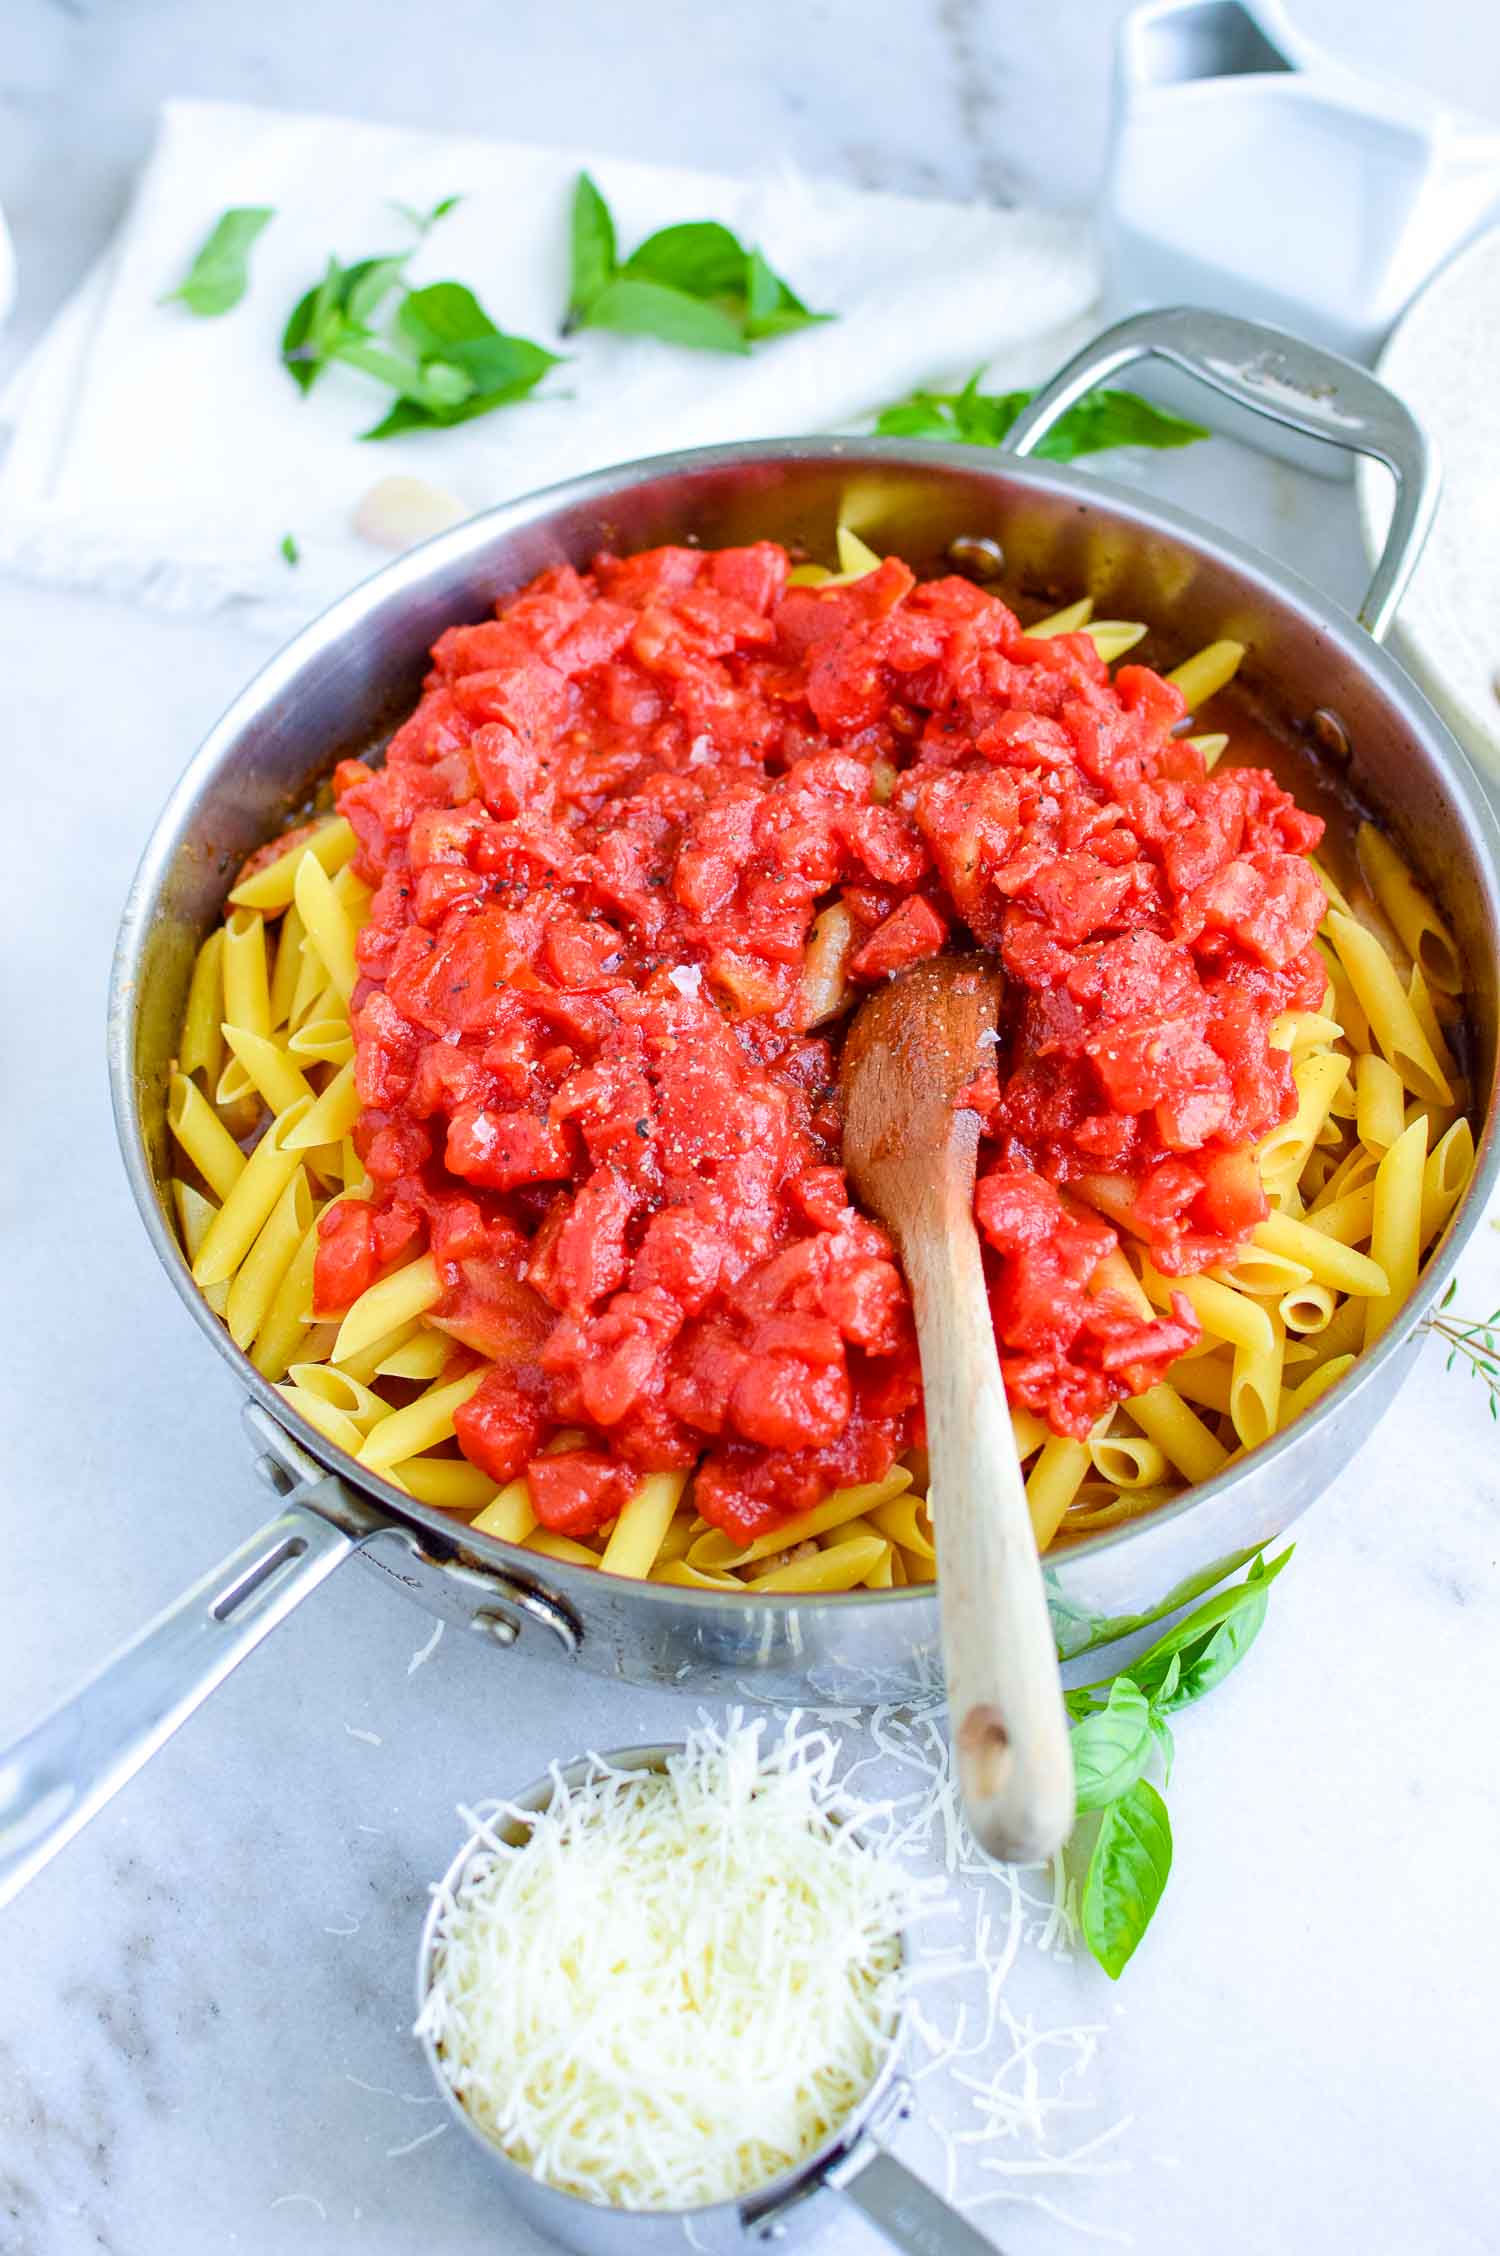 A silver pan of uncooked penne pasta with cut tomatoes and spices along with a wooden spoon inside of it and fresh herbs around it.